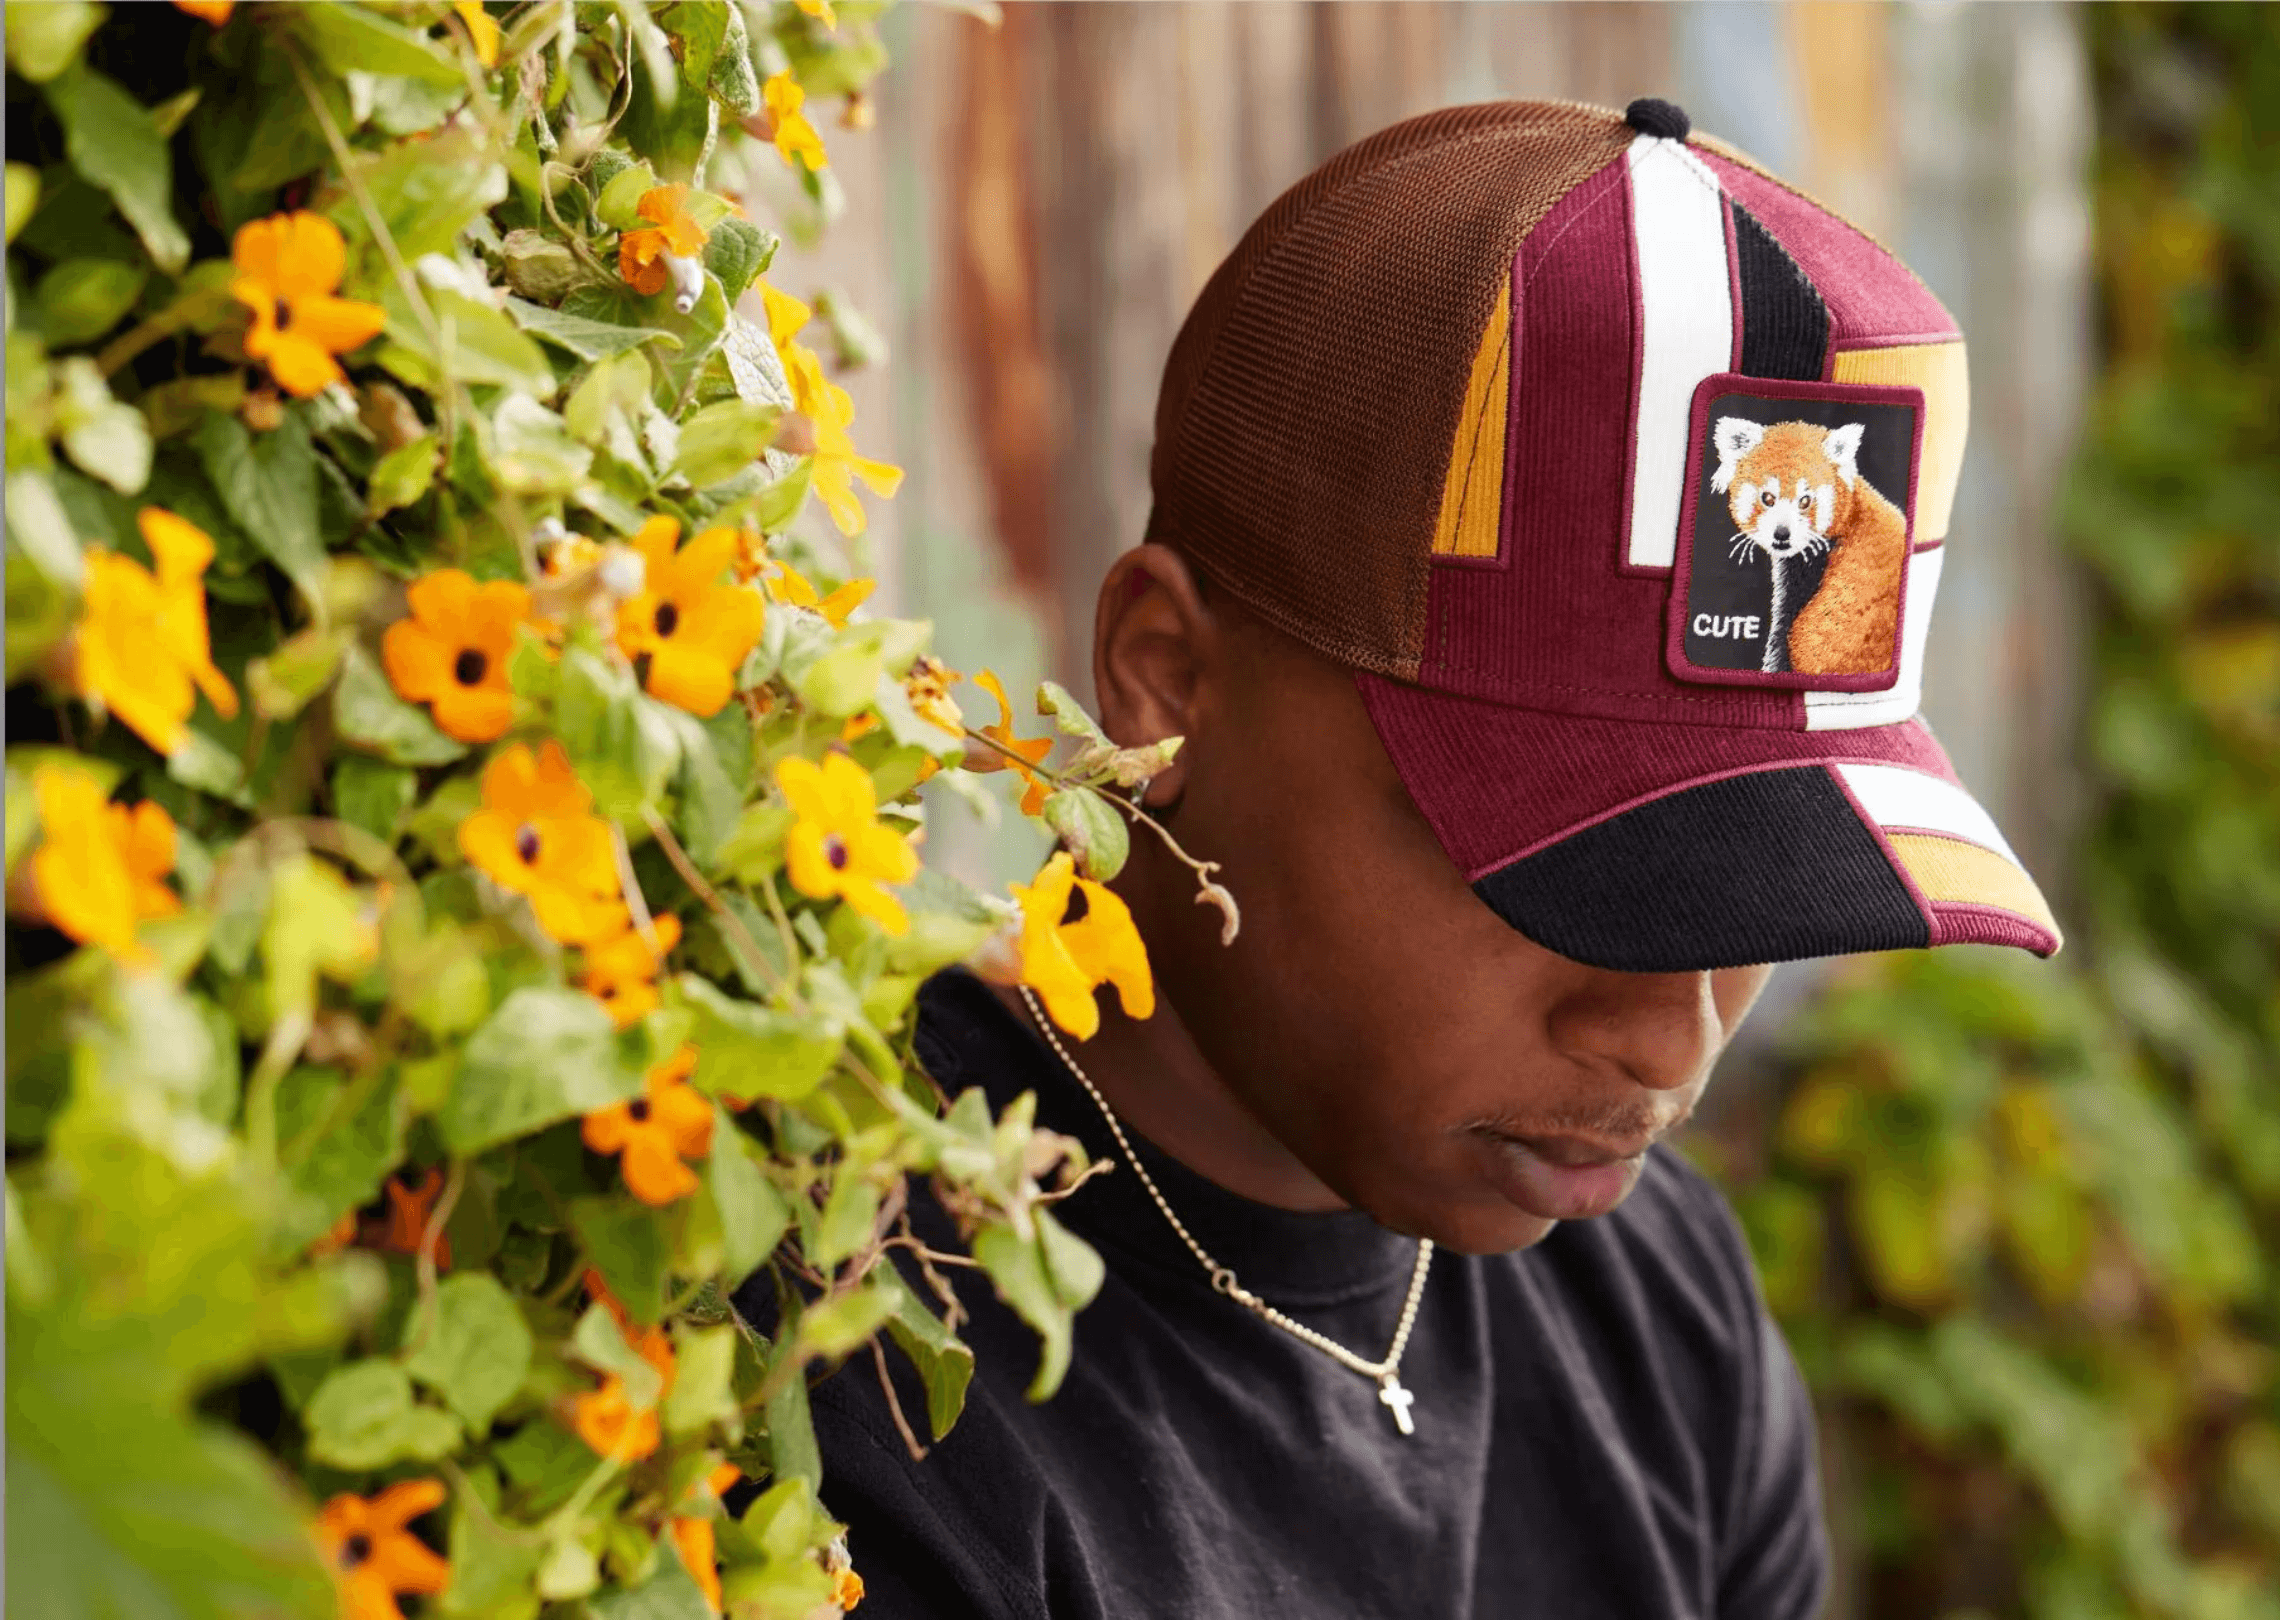 Man looking down, wearing Goorin Bros Trucker cap. He is standing next to a wall of flowers.